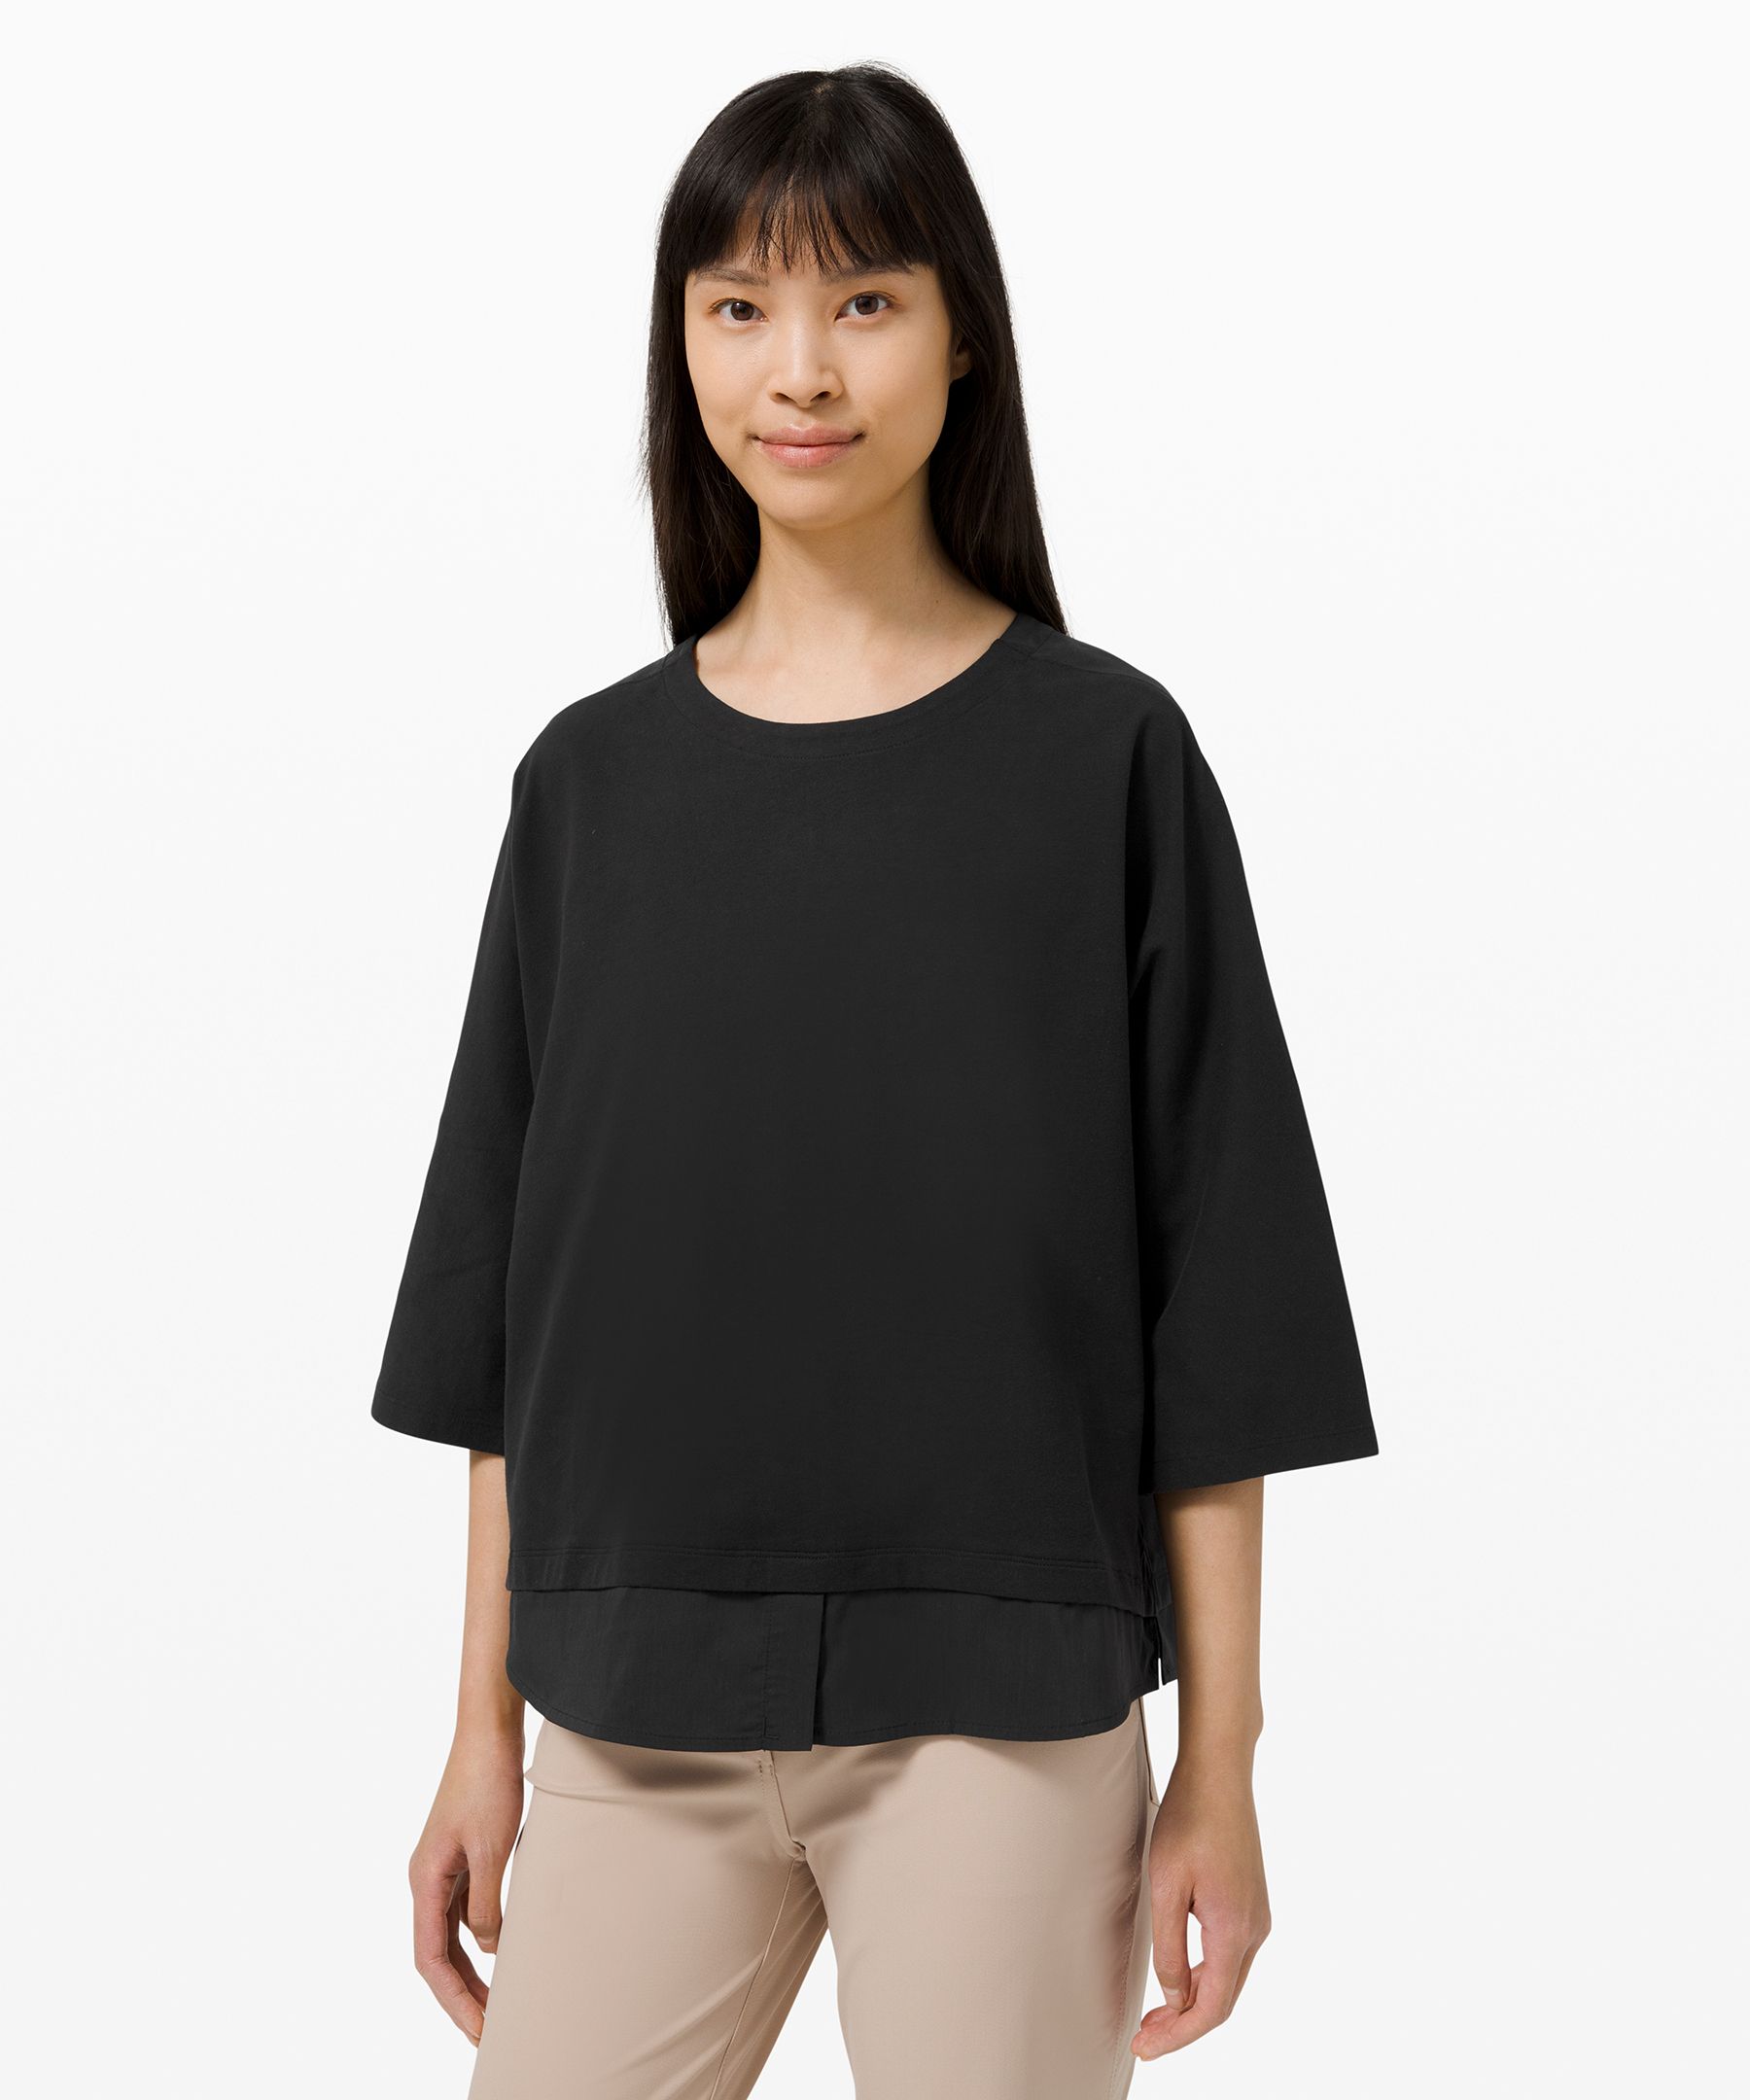 Lululemon Live To Layer Shirt In Black